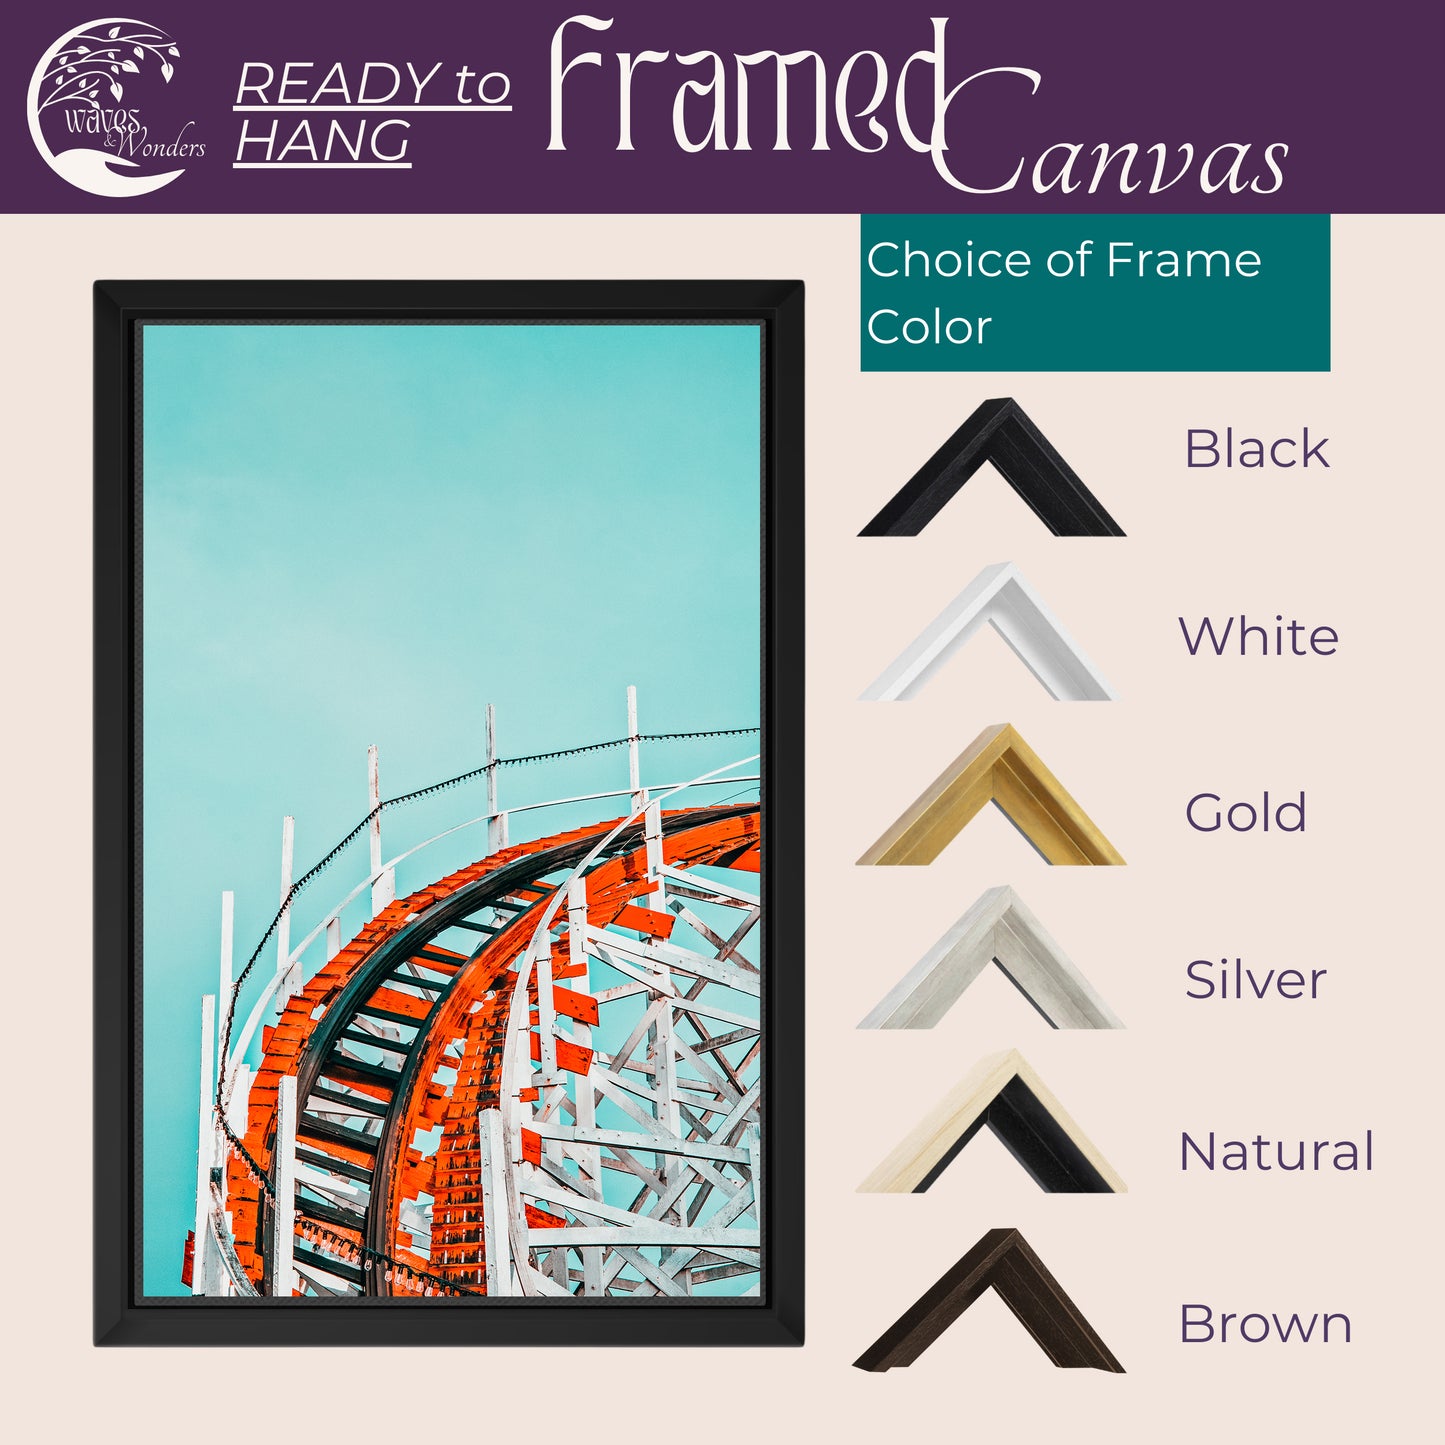 a picture of a roller coaster with frames